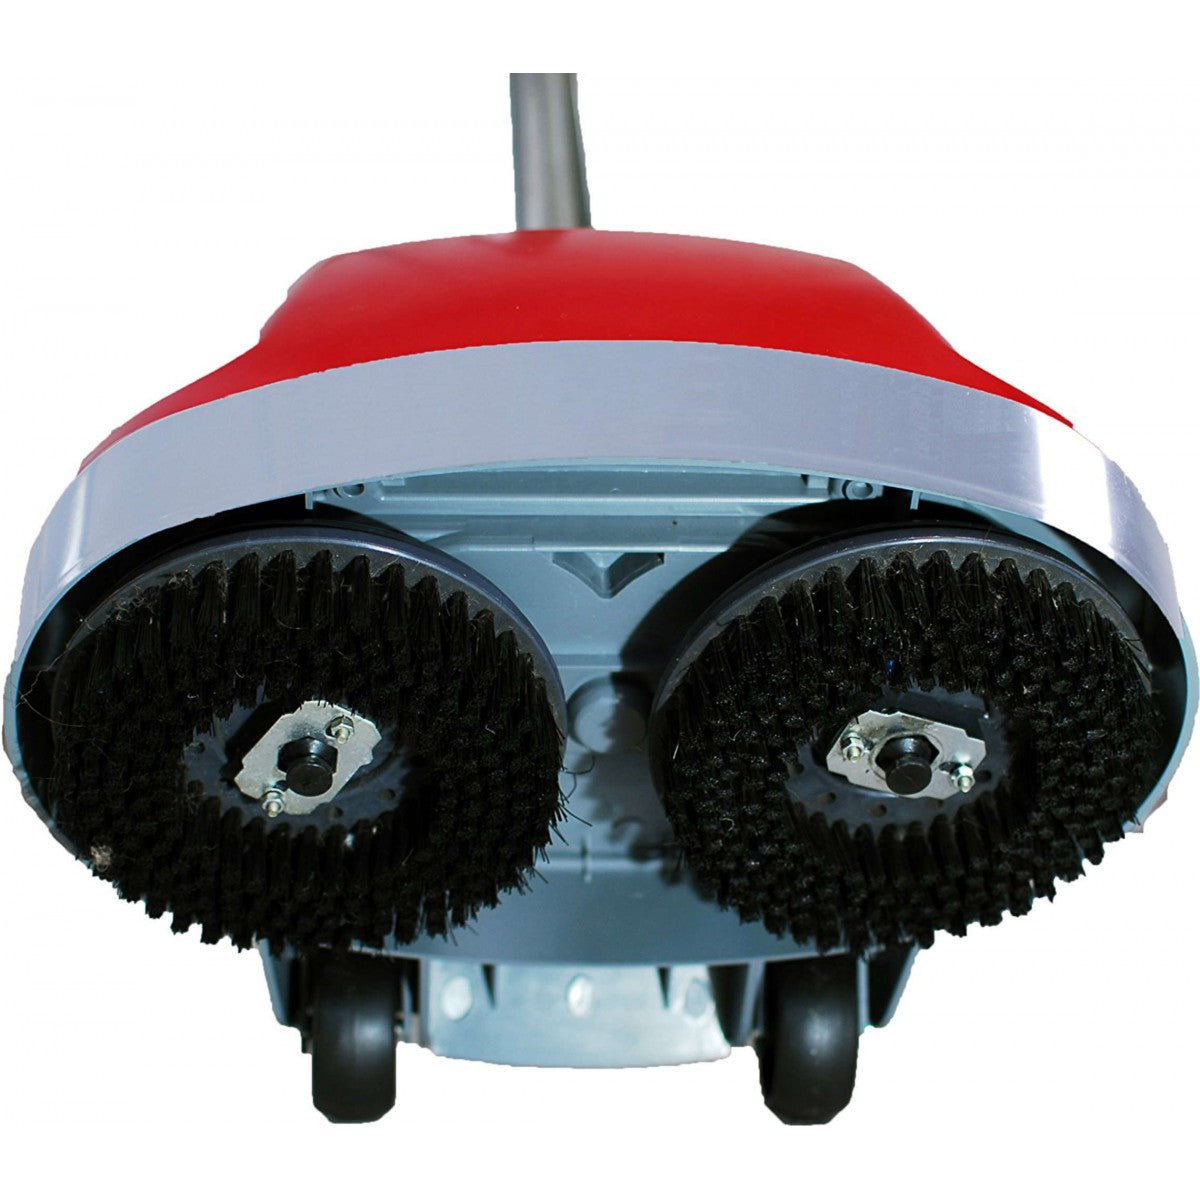 Floor Scrubber and Polisher with 2 Brushes